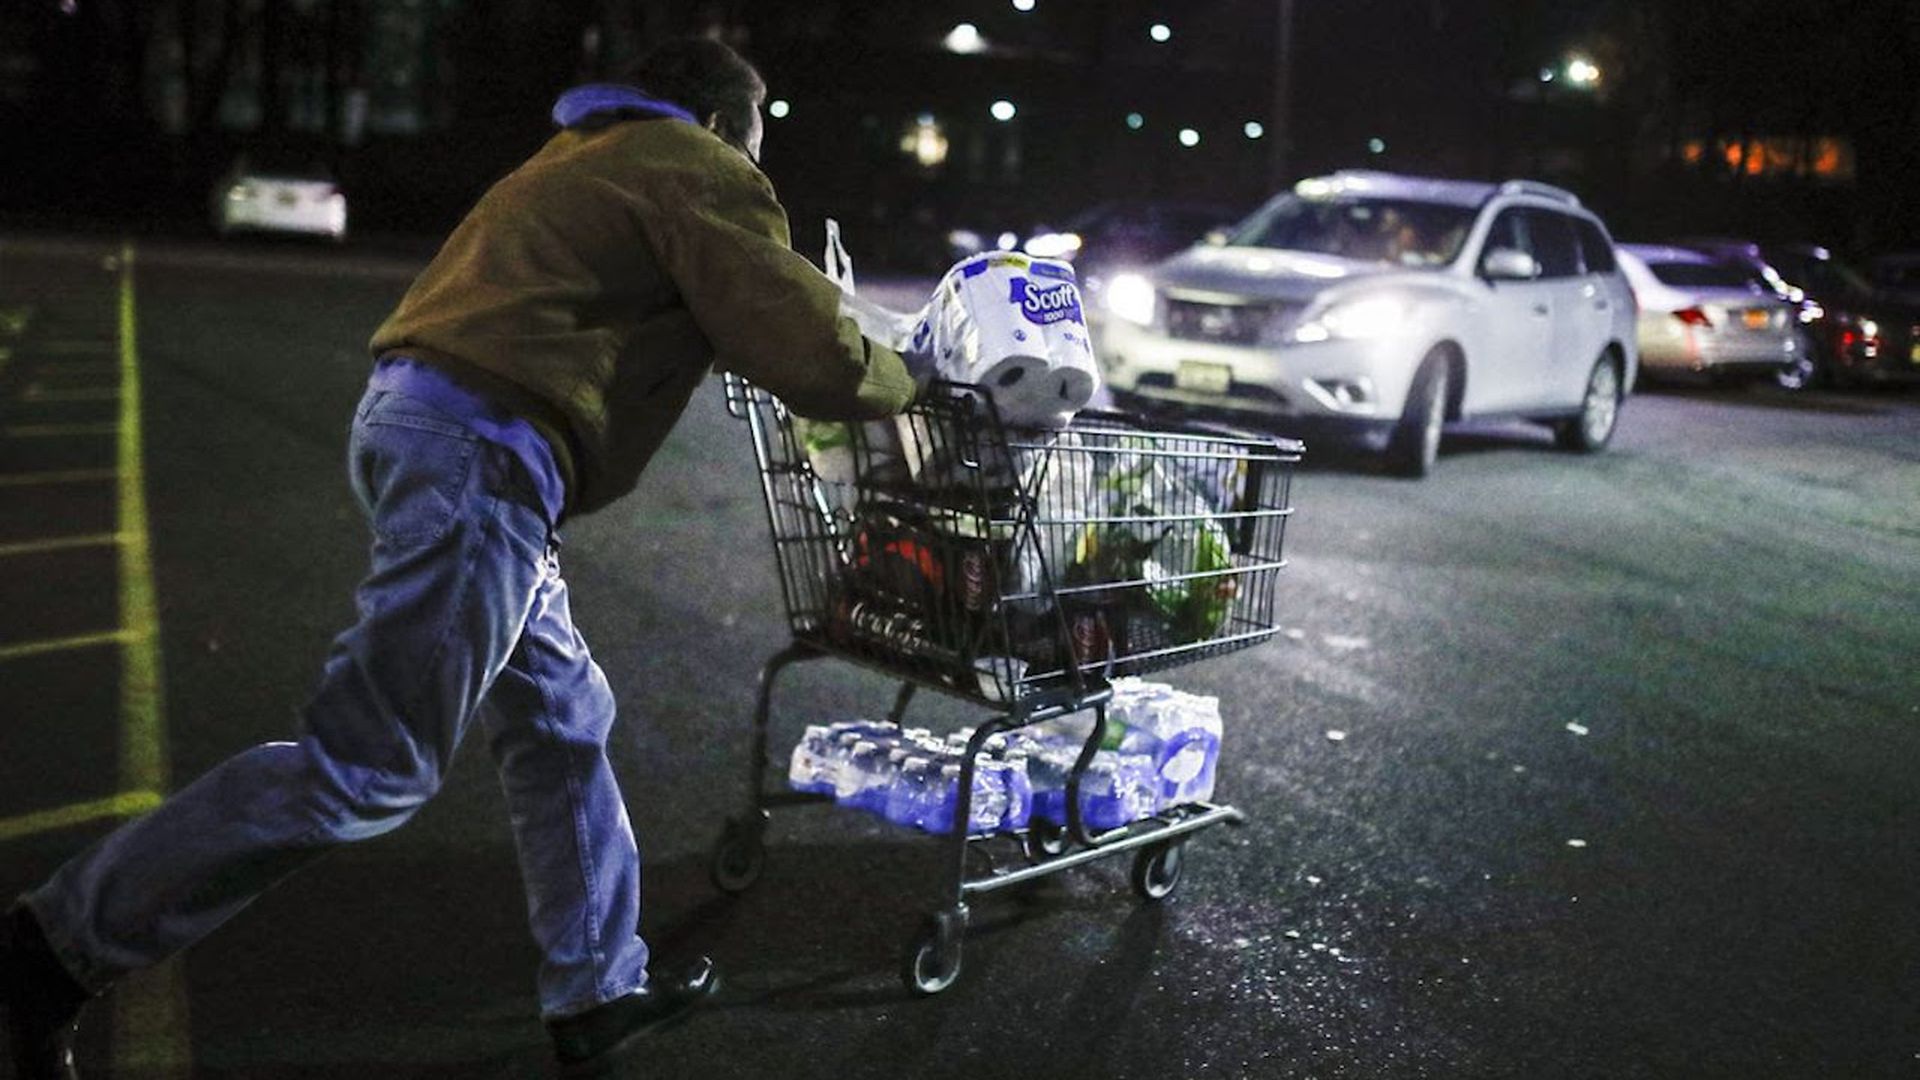 Man pushes a grocery cart in a parking lot